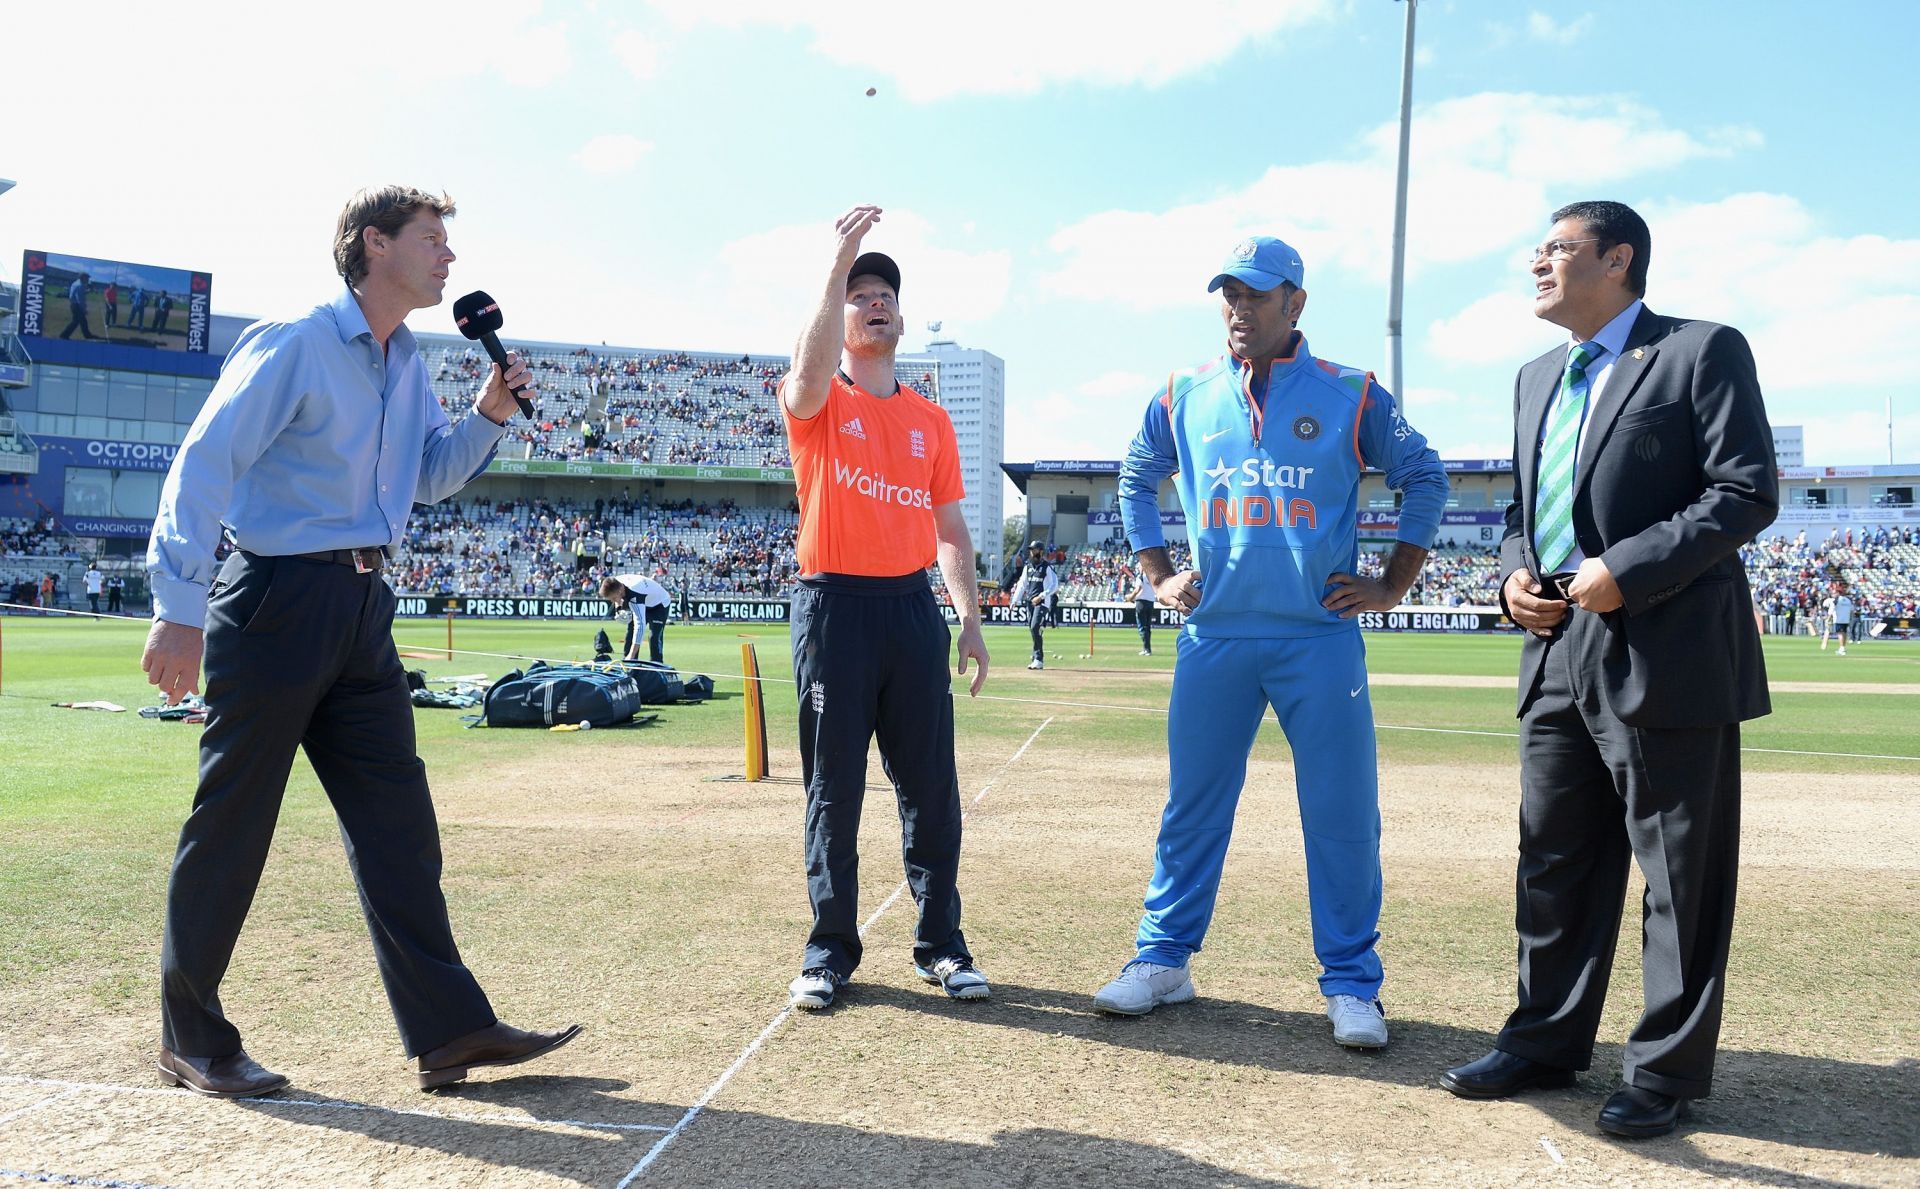 Eoin Morgan and MS Dhoni have been two of the most successful captains in T20 international cricket history